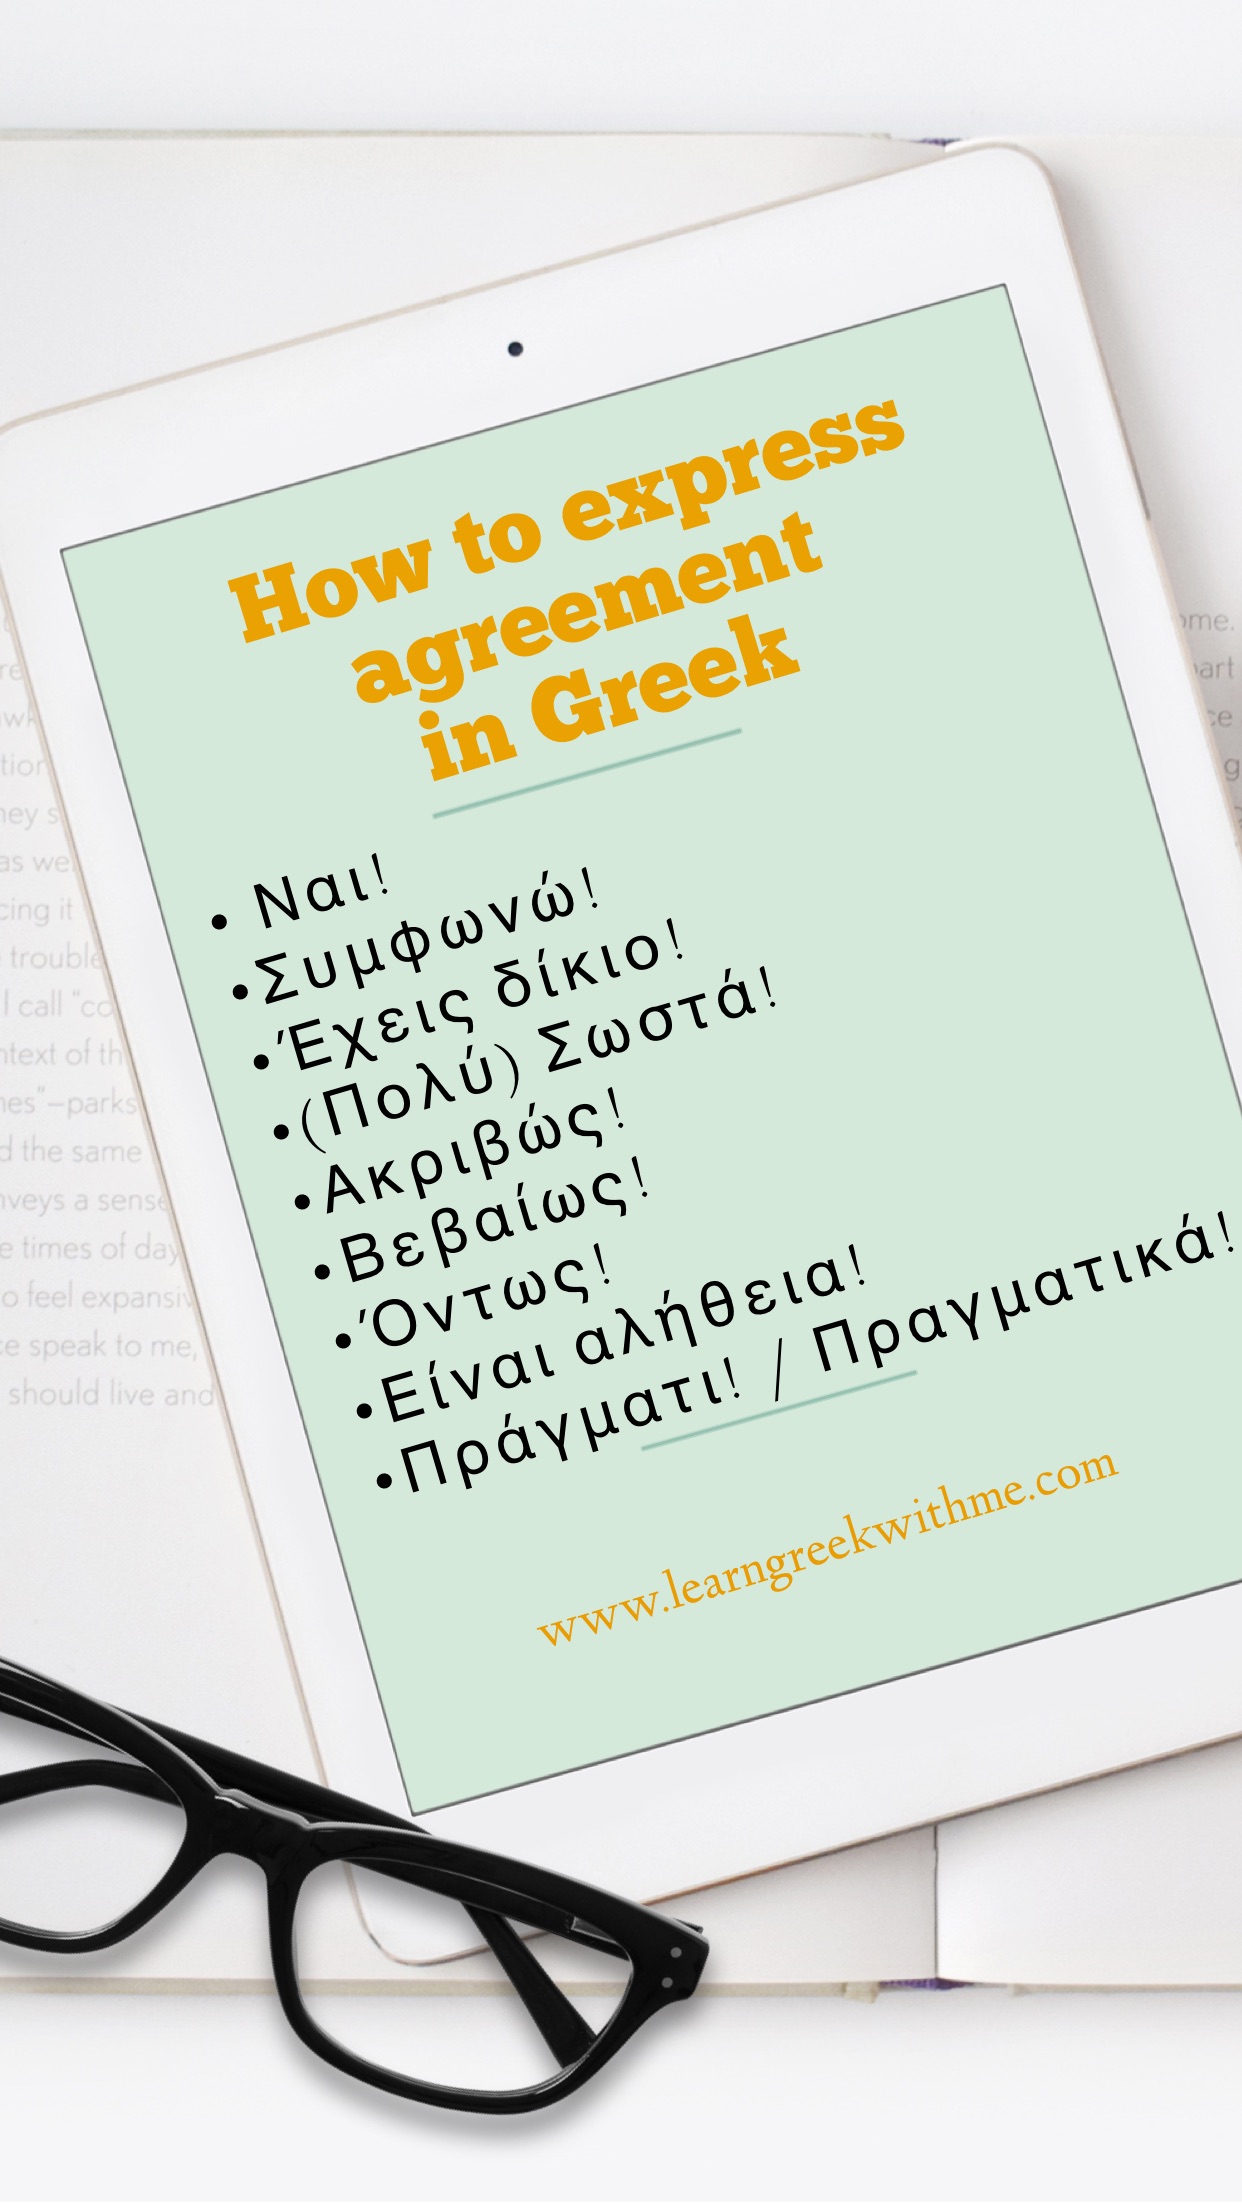 How to express agreement in Greek